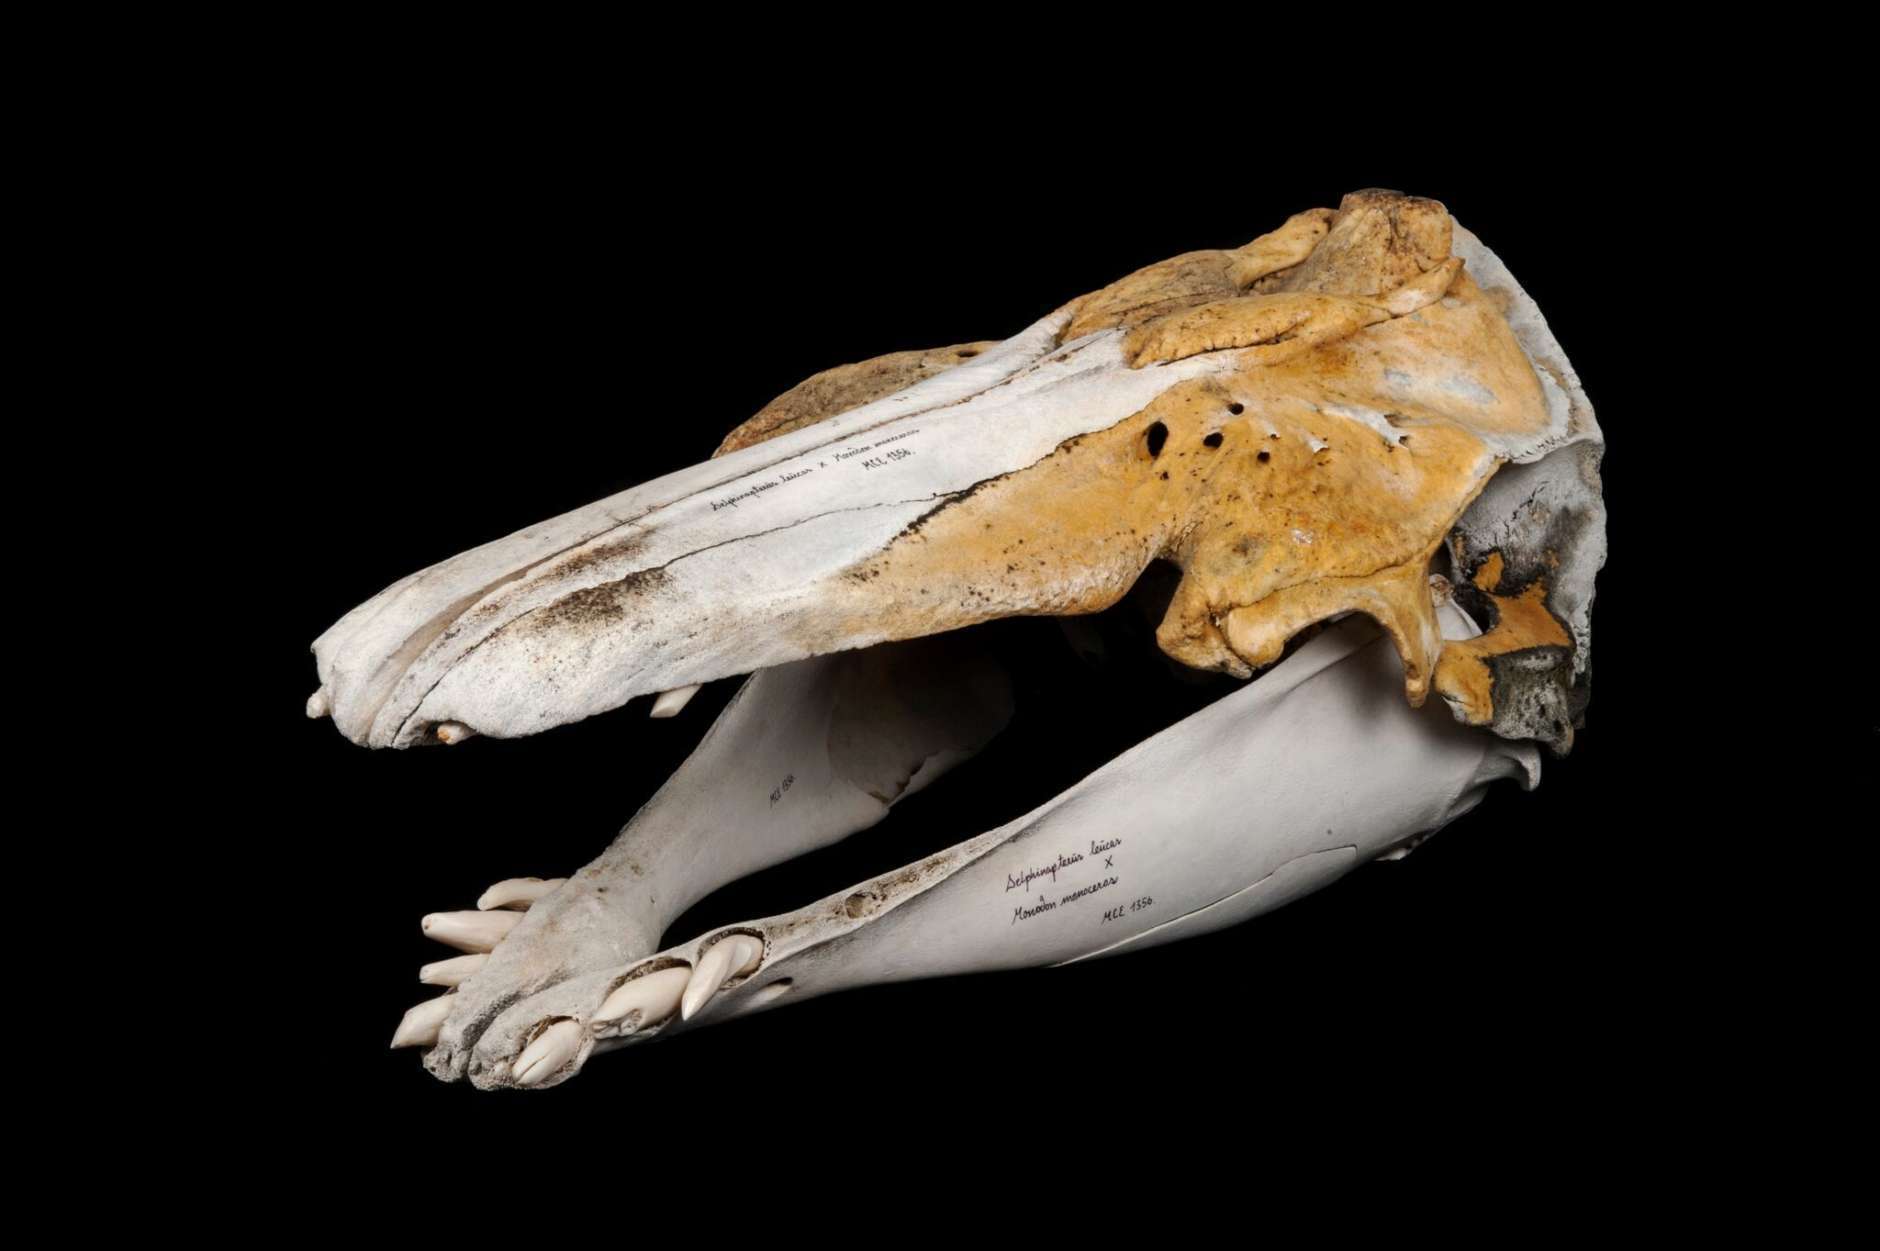 As temperatures increase and ice melts throughout the Arctic, many species are migrating north and sharing habitats. Sometimes, closely related species mate and produce hybrid offspring. This skull comes from a “narluga,” or narwhal-beluga hybrid, captured in Greenland. It has a particularly large head and some erupted teeth — but unlike a beluga’s flat, peg-like teeth, they are shaped like tiny narwhal tusks. Narwhals and other Arctic species are remarkably adapted to their cold, harsh habitat. As the global climate warms and ice cover declines, they are changing their behaviors in ways that affect their entire food web. (Courtesy Mikkel H. Post, Natural History Museum of Denmark)